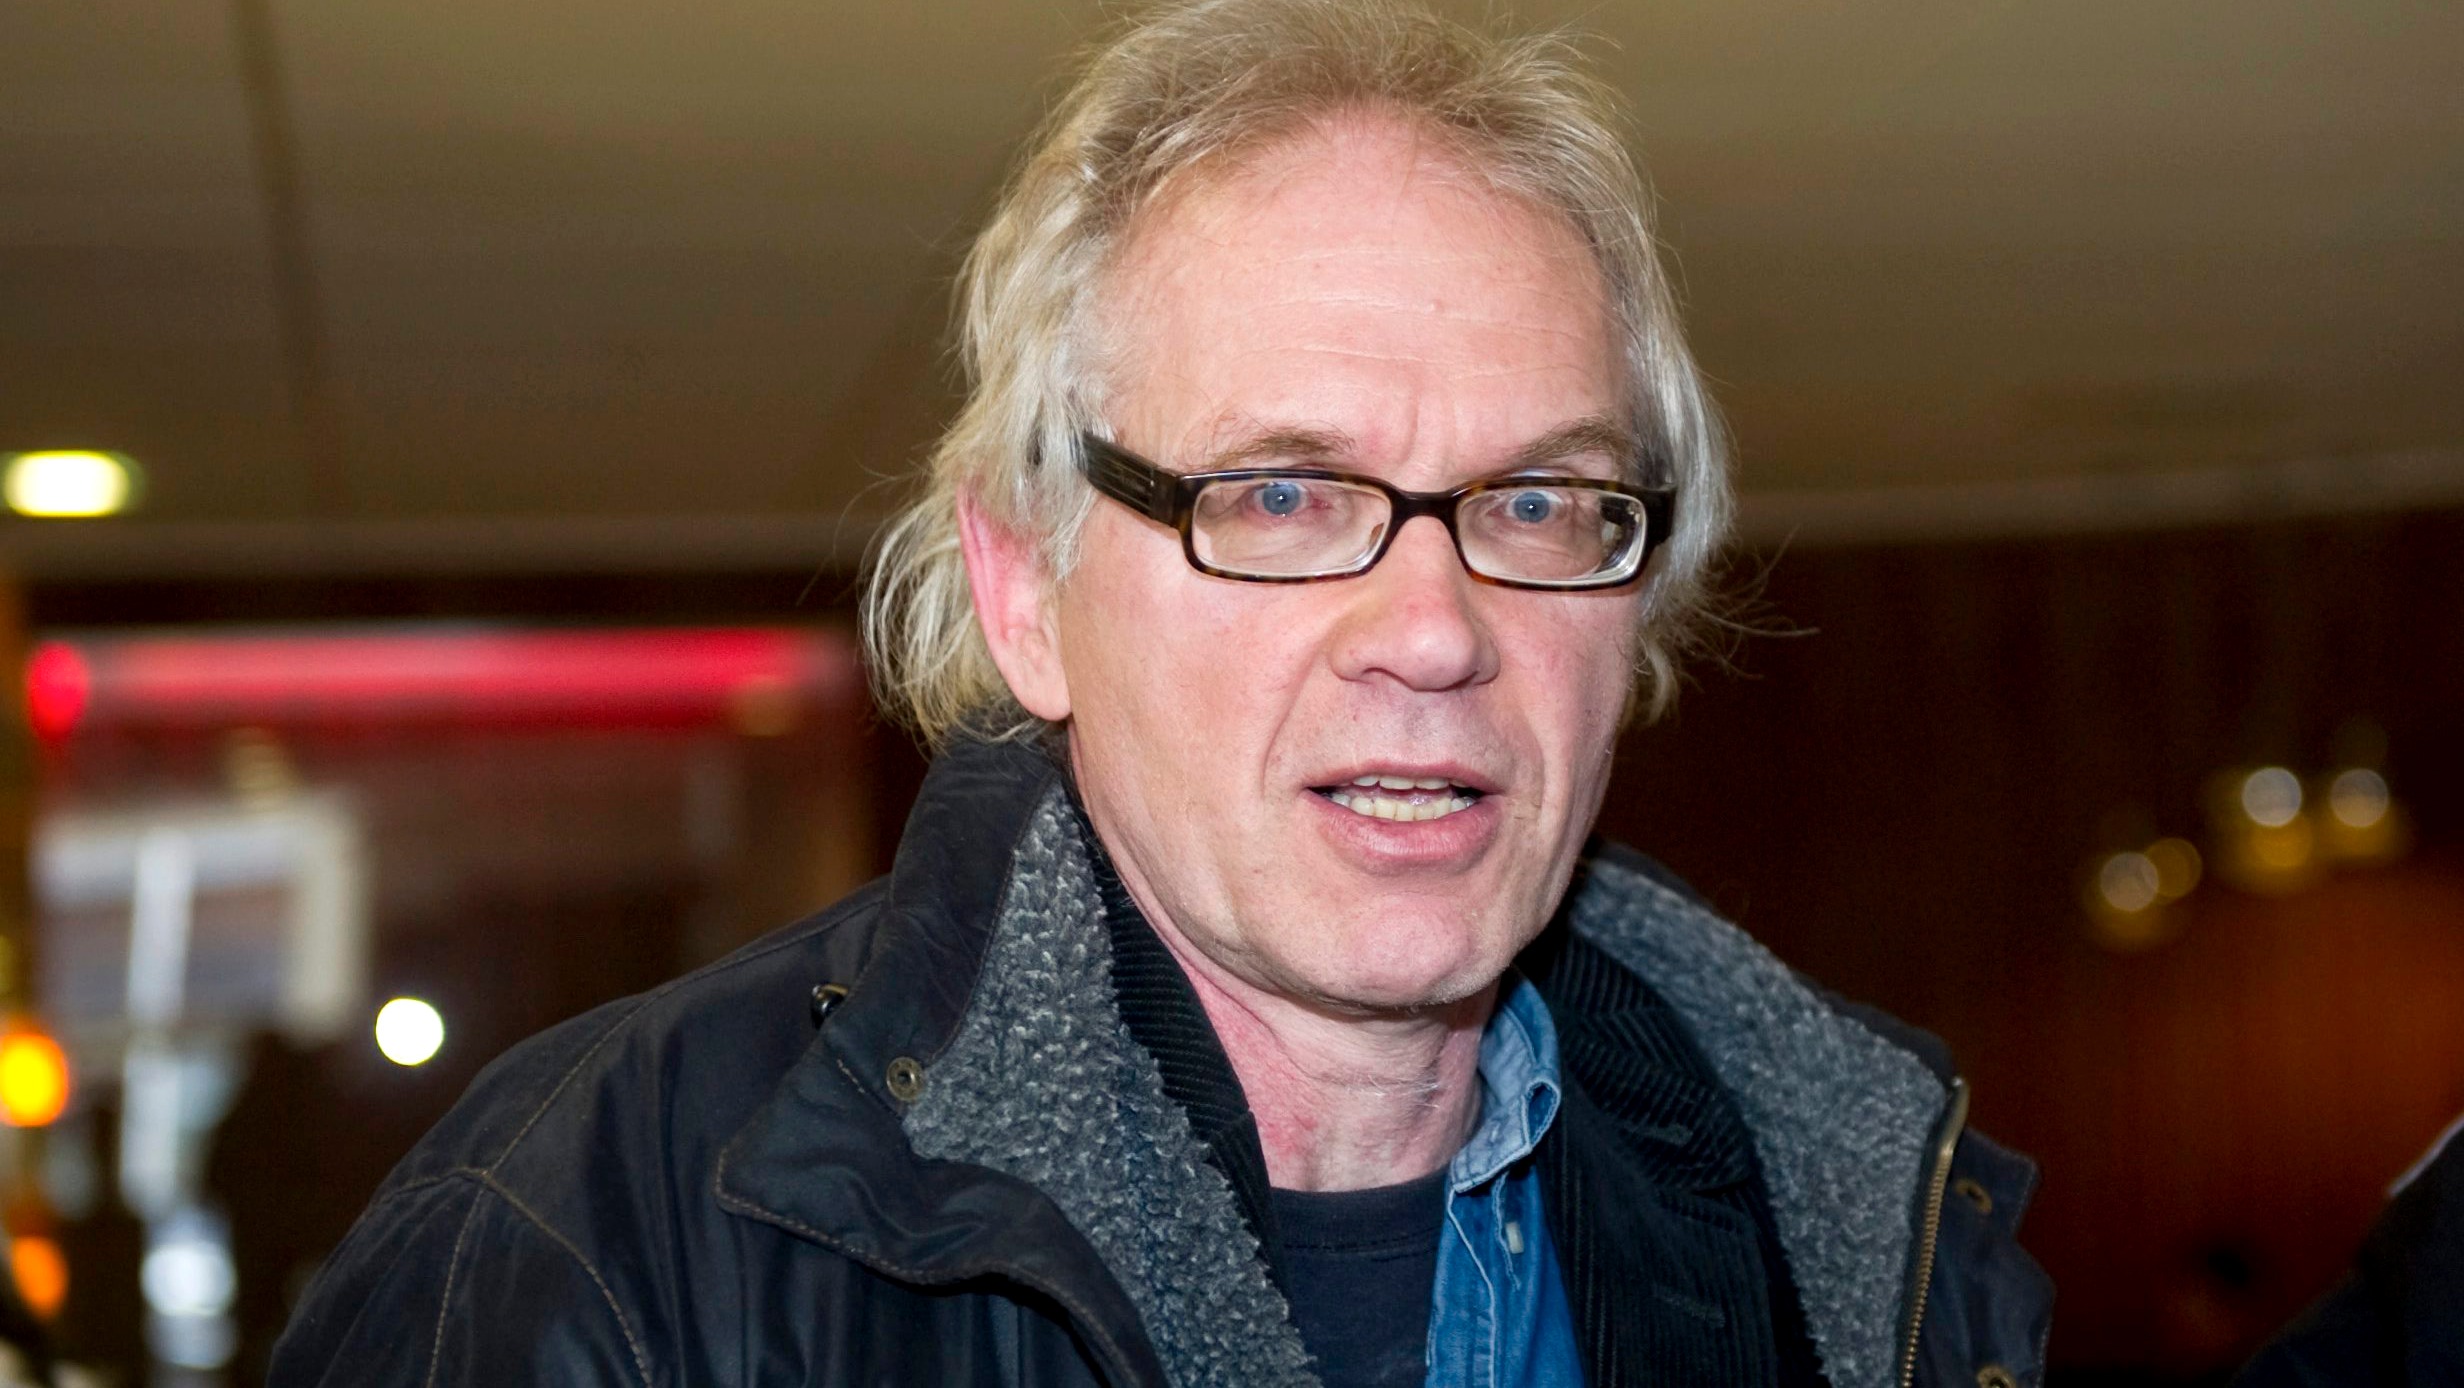 Lars Vilks: What we know about the controversial artist | ITV News